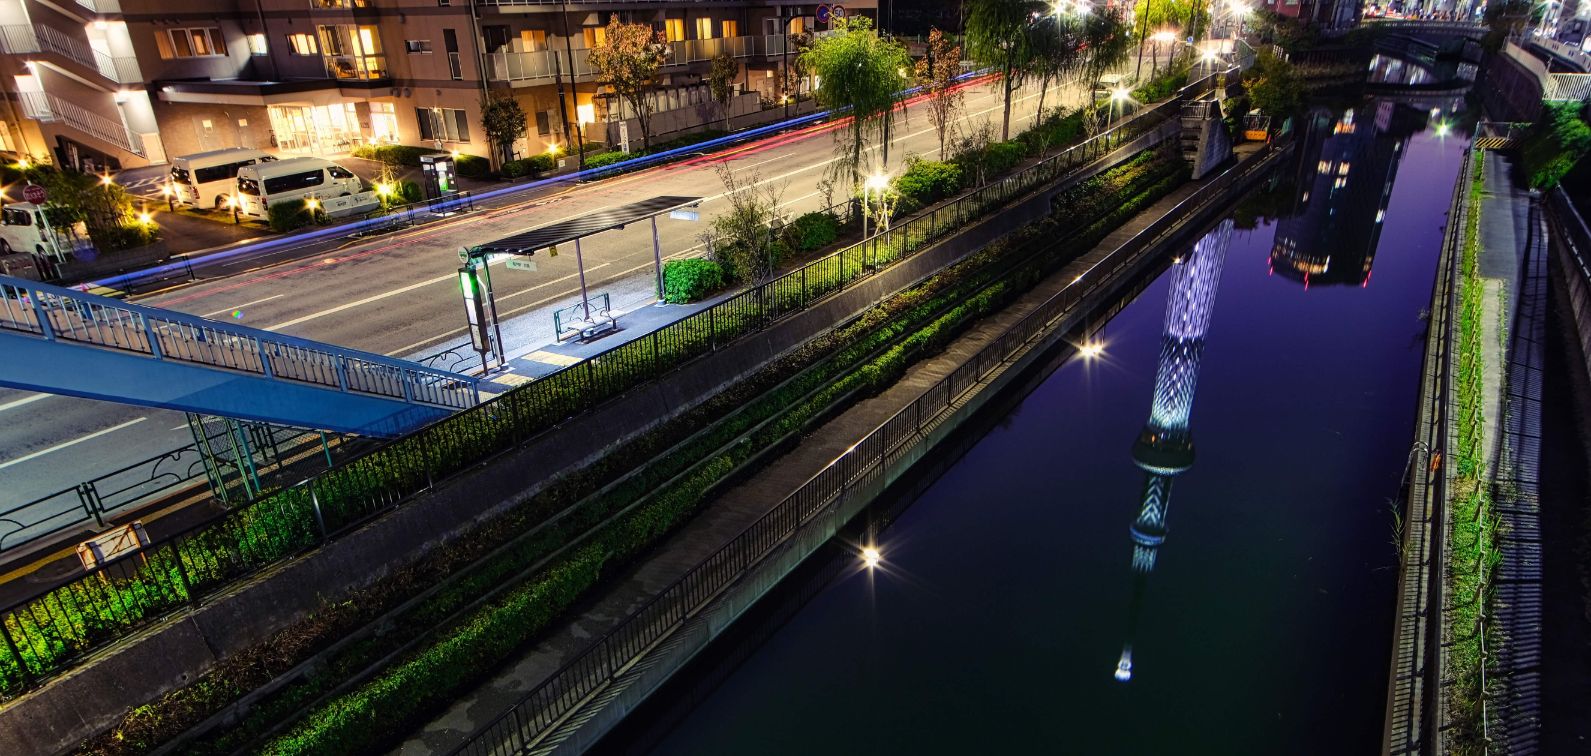 The river acts as a leading line towards the Skytree. The colors cast at this spot during sunset is mesmerizing. A great spot for a romantic date too.